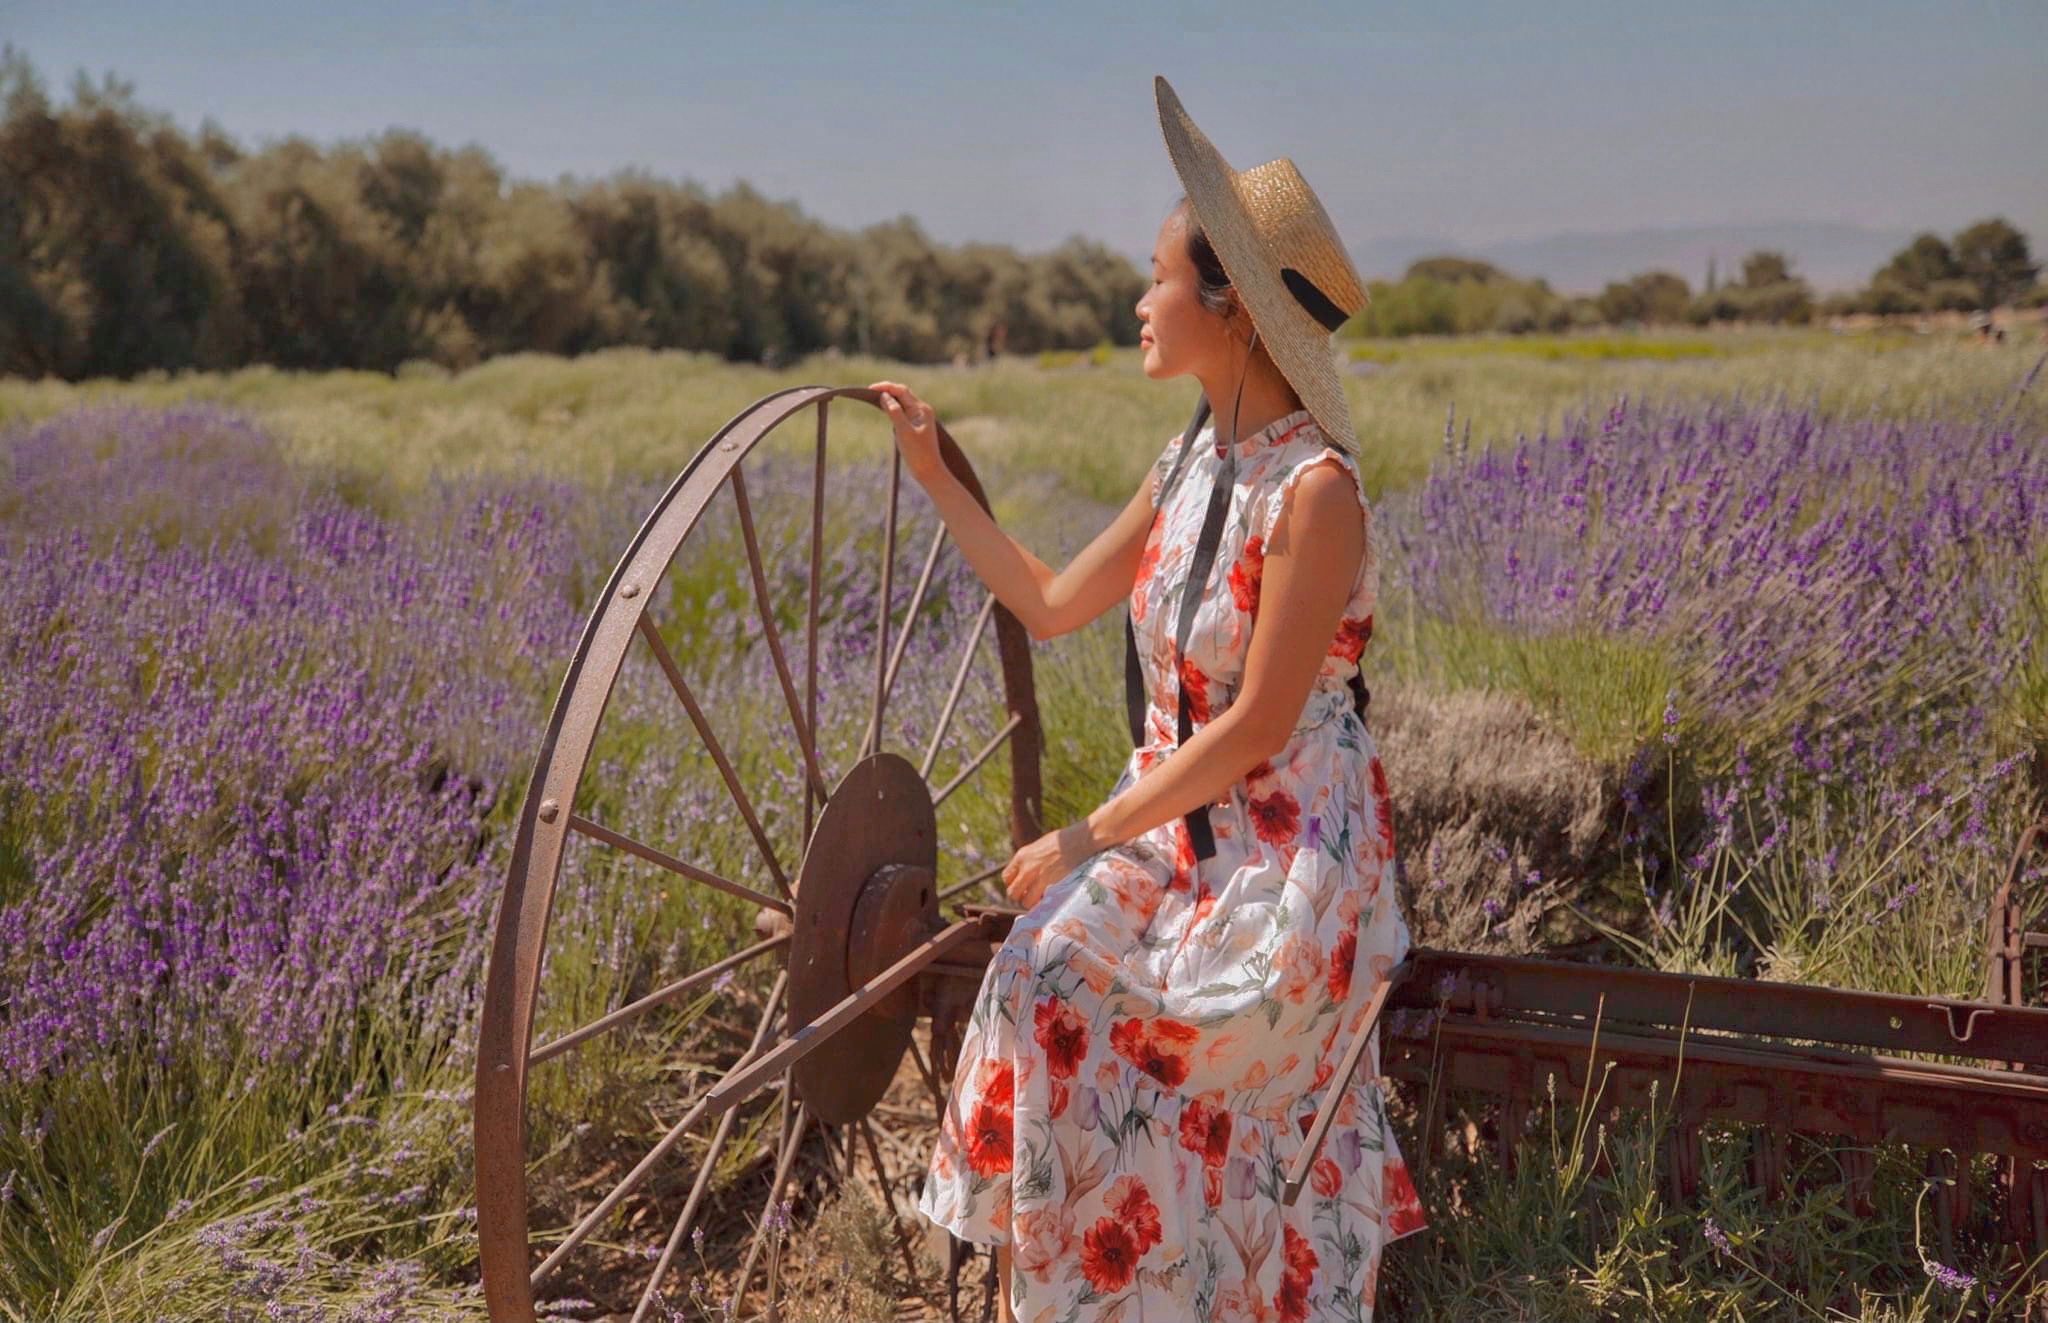 A GUIDE TO THE LAVENDER FESTIVAL BY 123 FARM inAra By May Pham